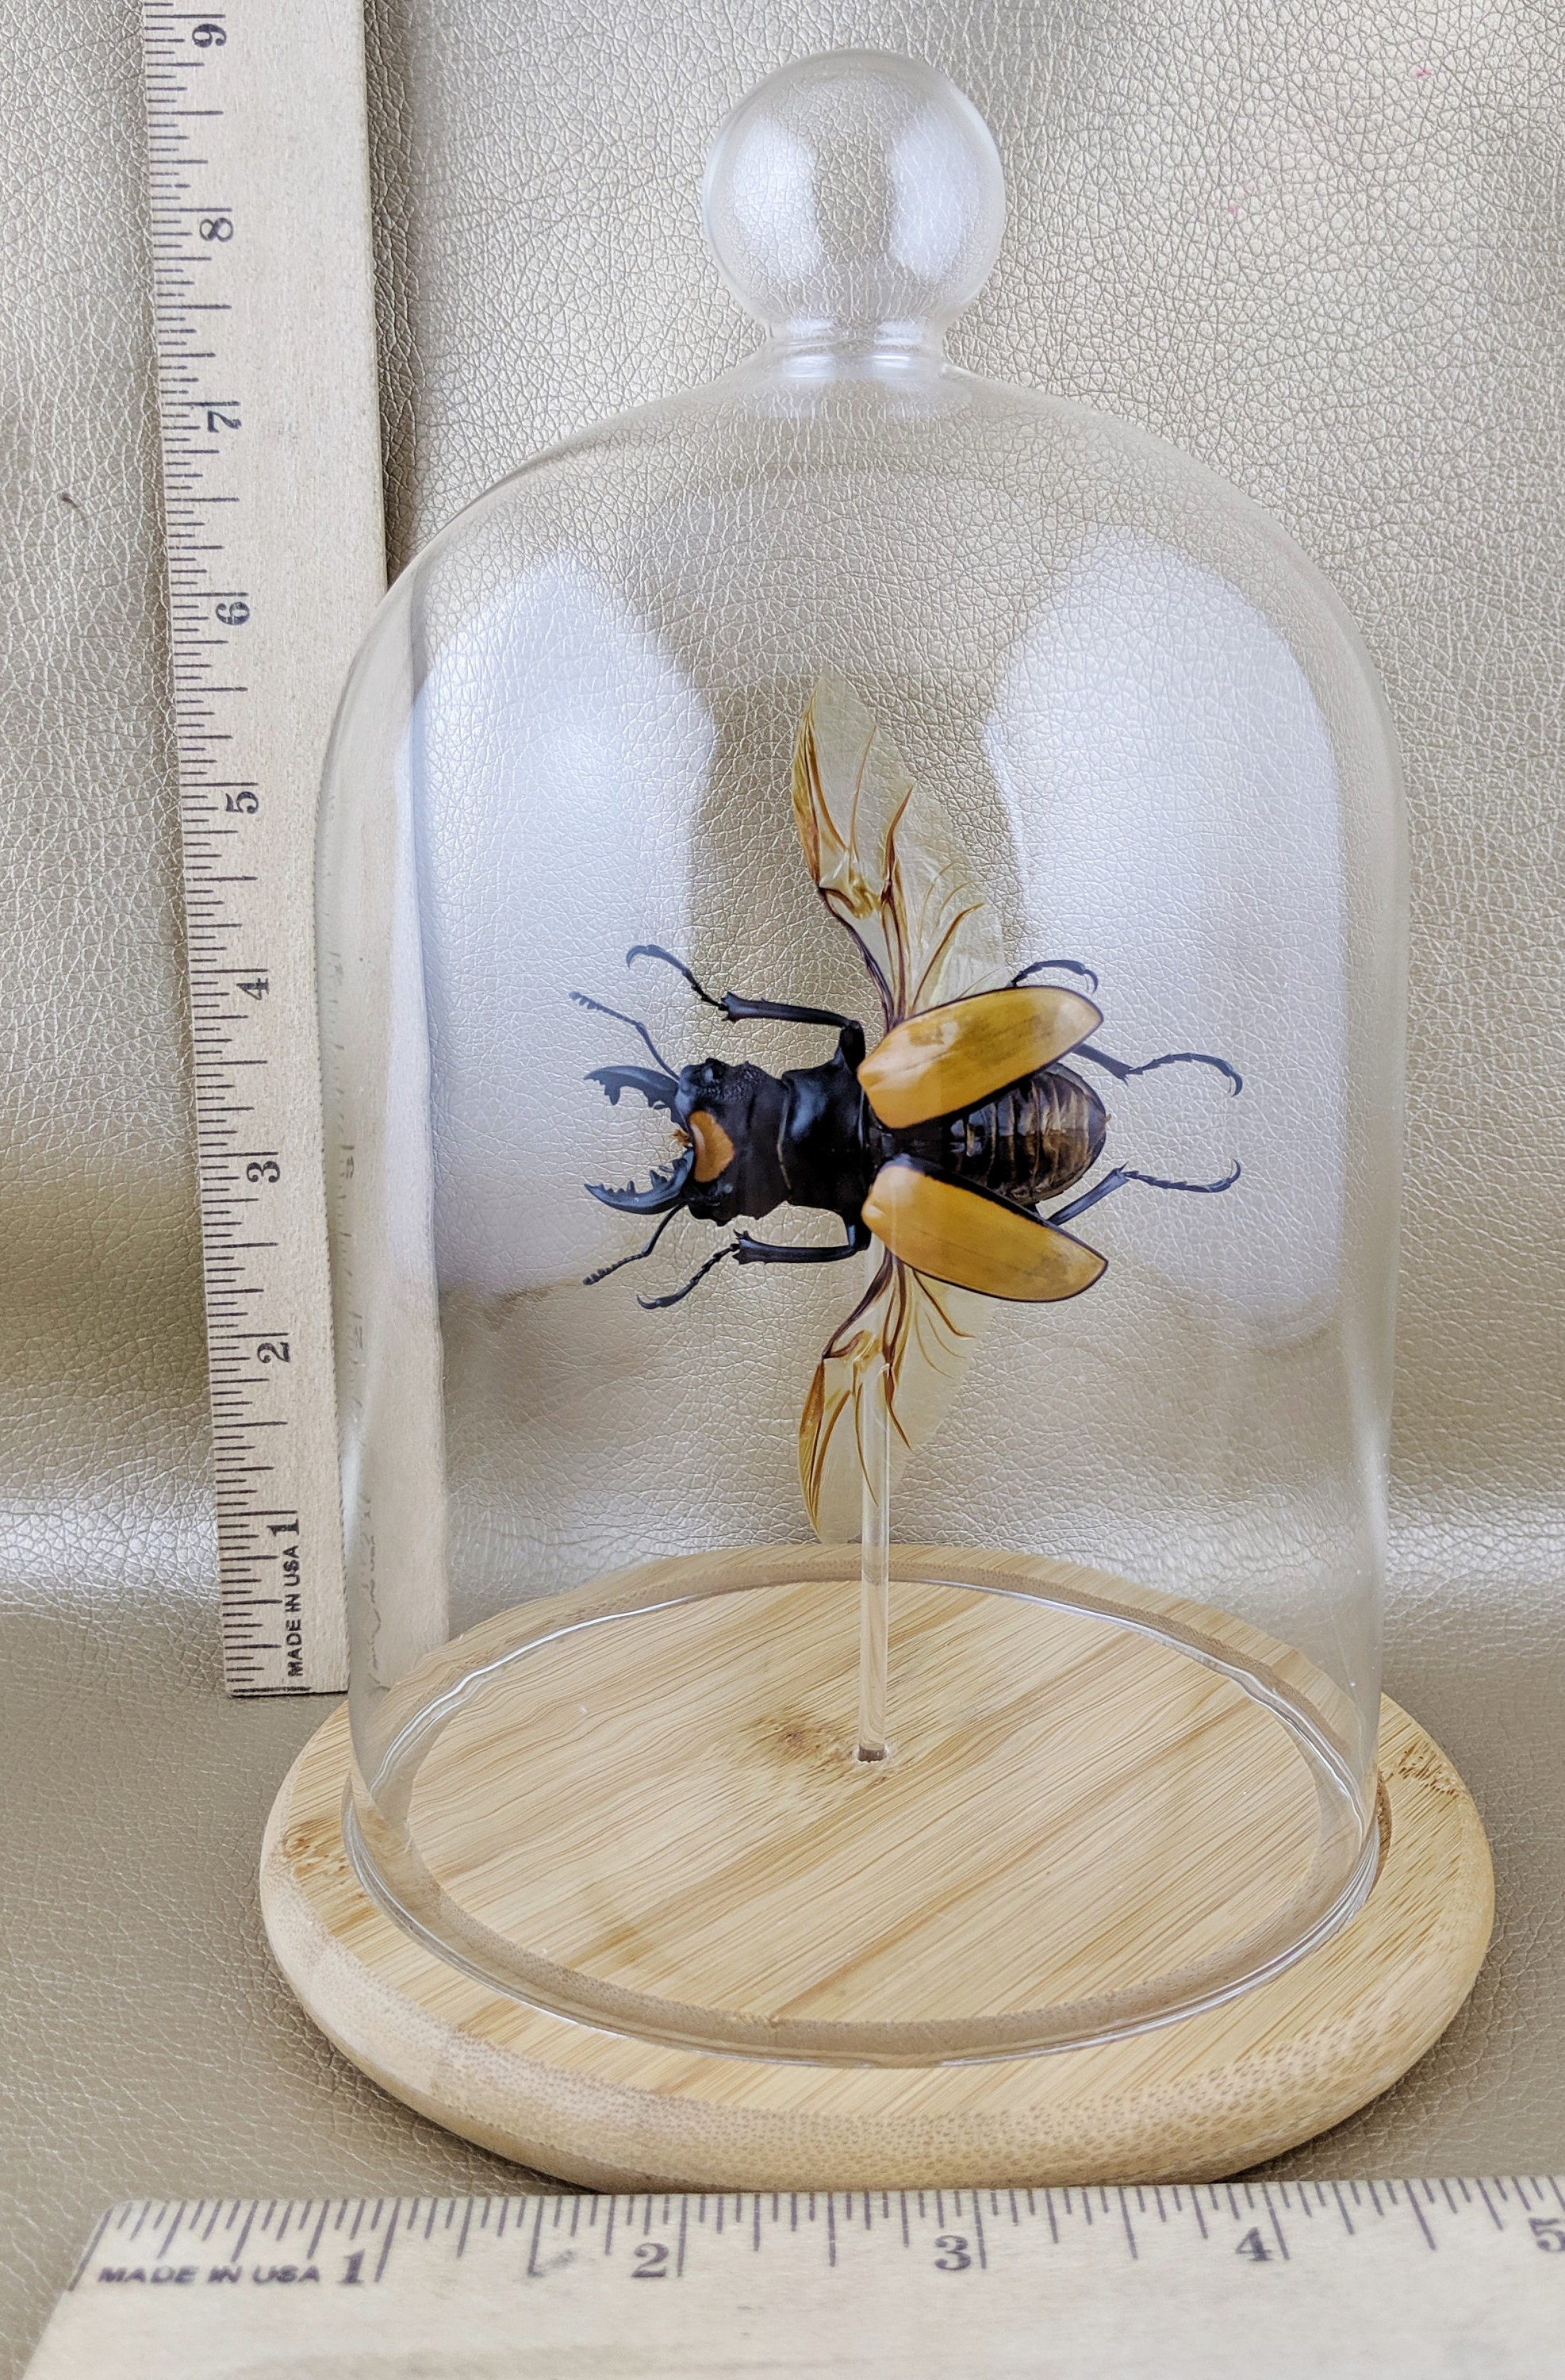 W94 Entomology Taxidermy Jewel Beetle glass dome Display Specimen Collectible 